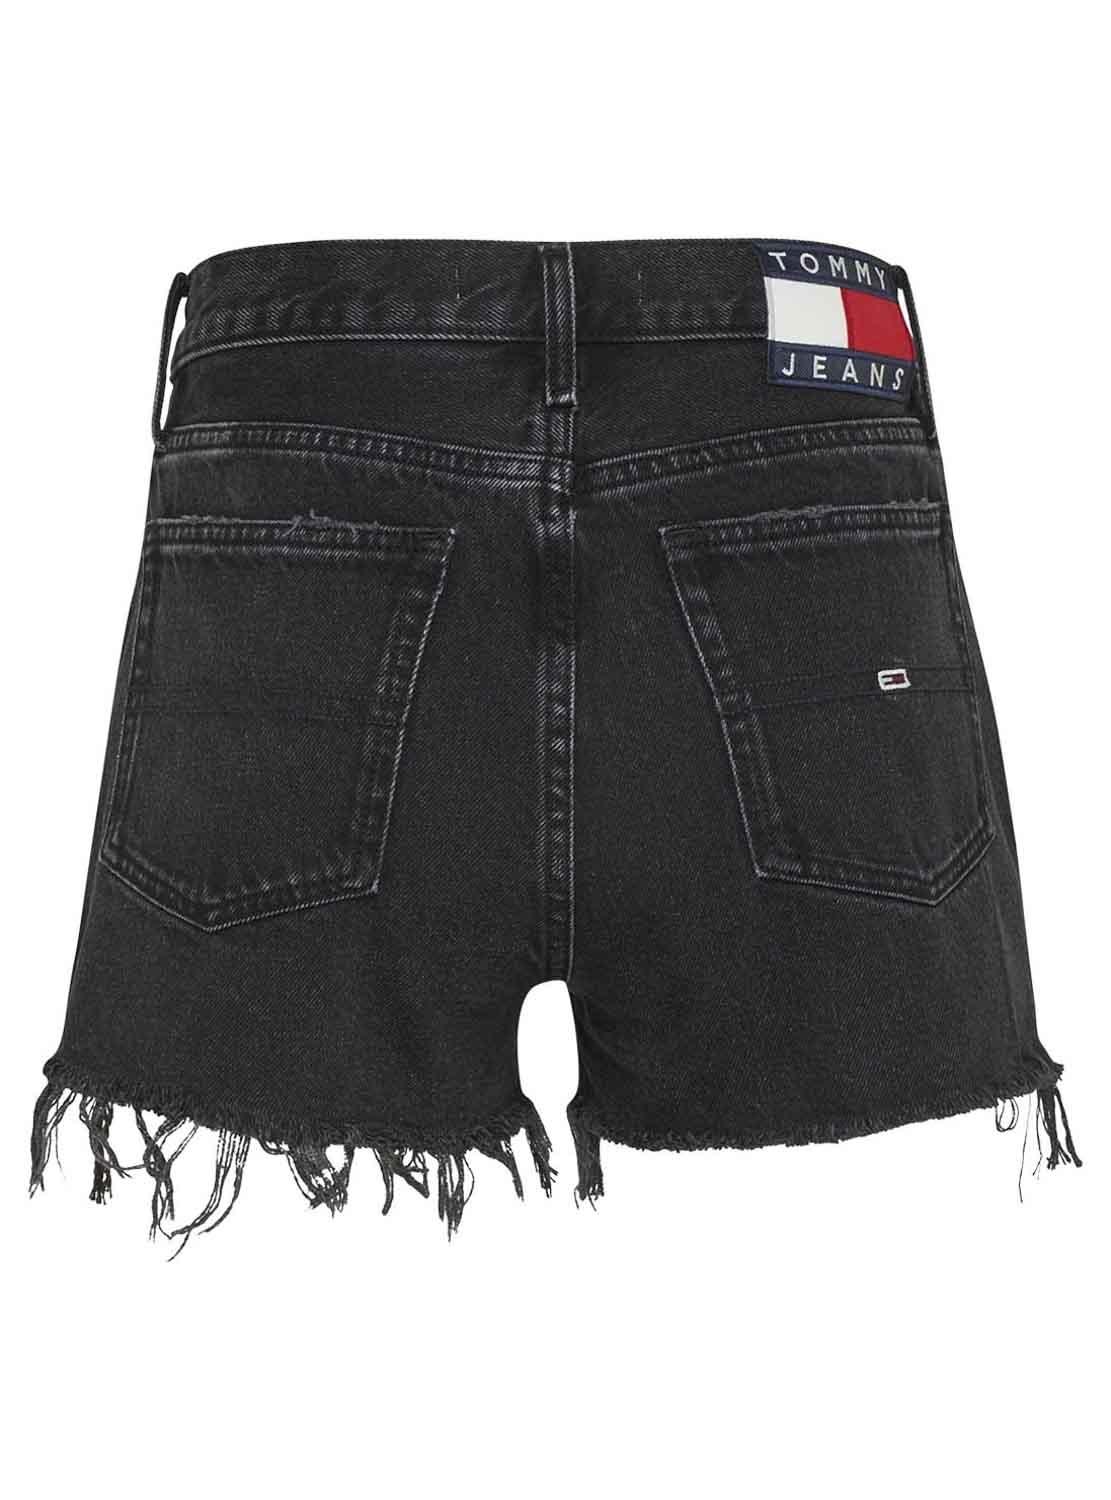 Shorts Tommy Jeans Hot Nero per Donna